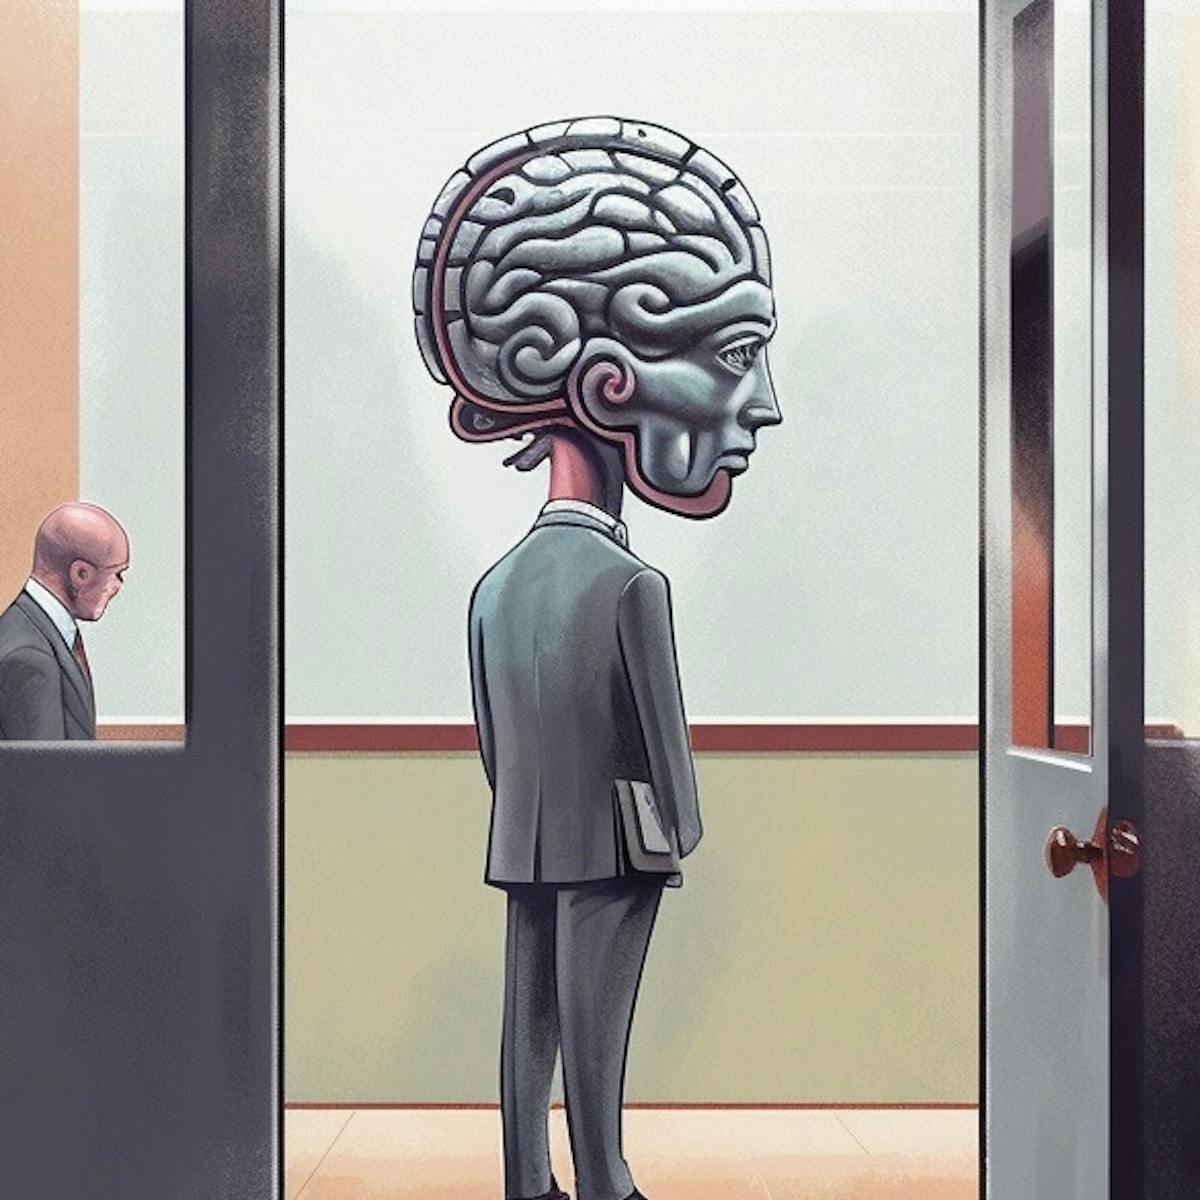 Midjourney v5: “painterly illustration of a floating robot brain watching as a laid-off worker exits the front office door”